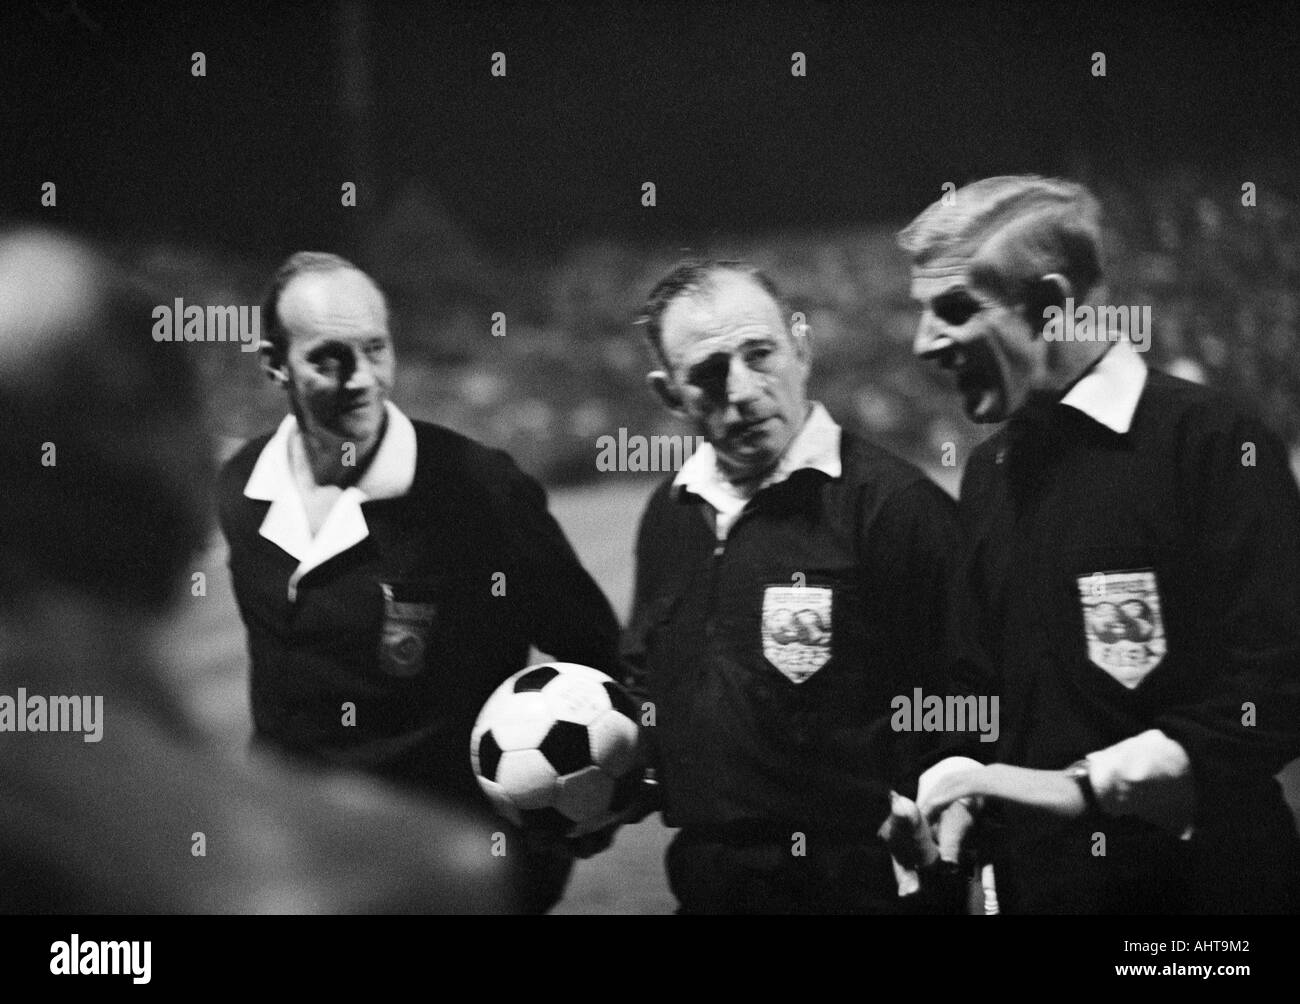 football, European Cup, 1971/1972, eighth final, first leg, Borussia Moenchengladbach versus Inter Mailand 7:1, Boekelberg Stadium in Moenchengladbach, the match officials with referee Doorpmans from the Netherlands (middle) go for halftime and discuss th Stock Photo